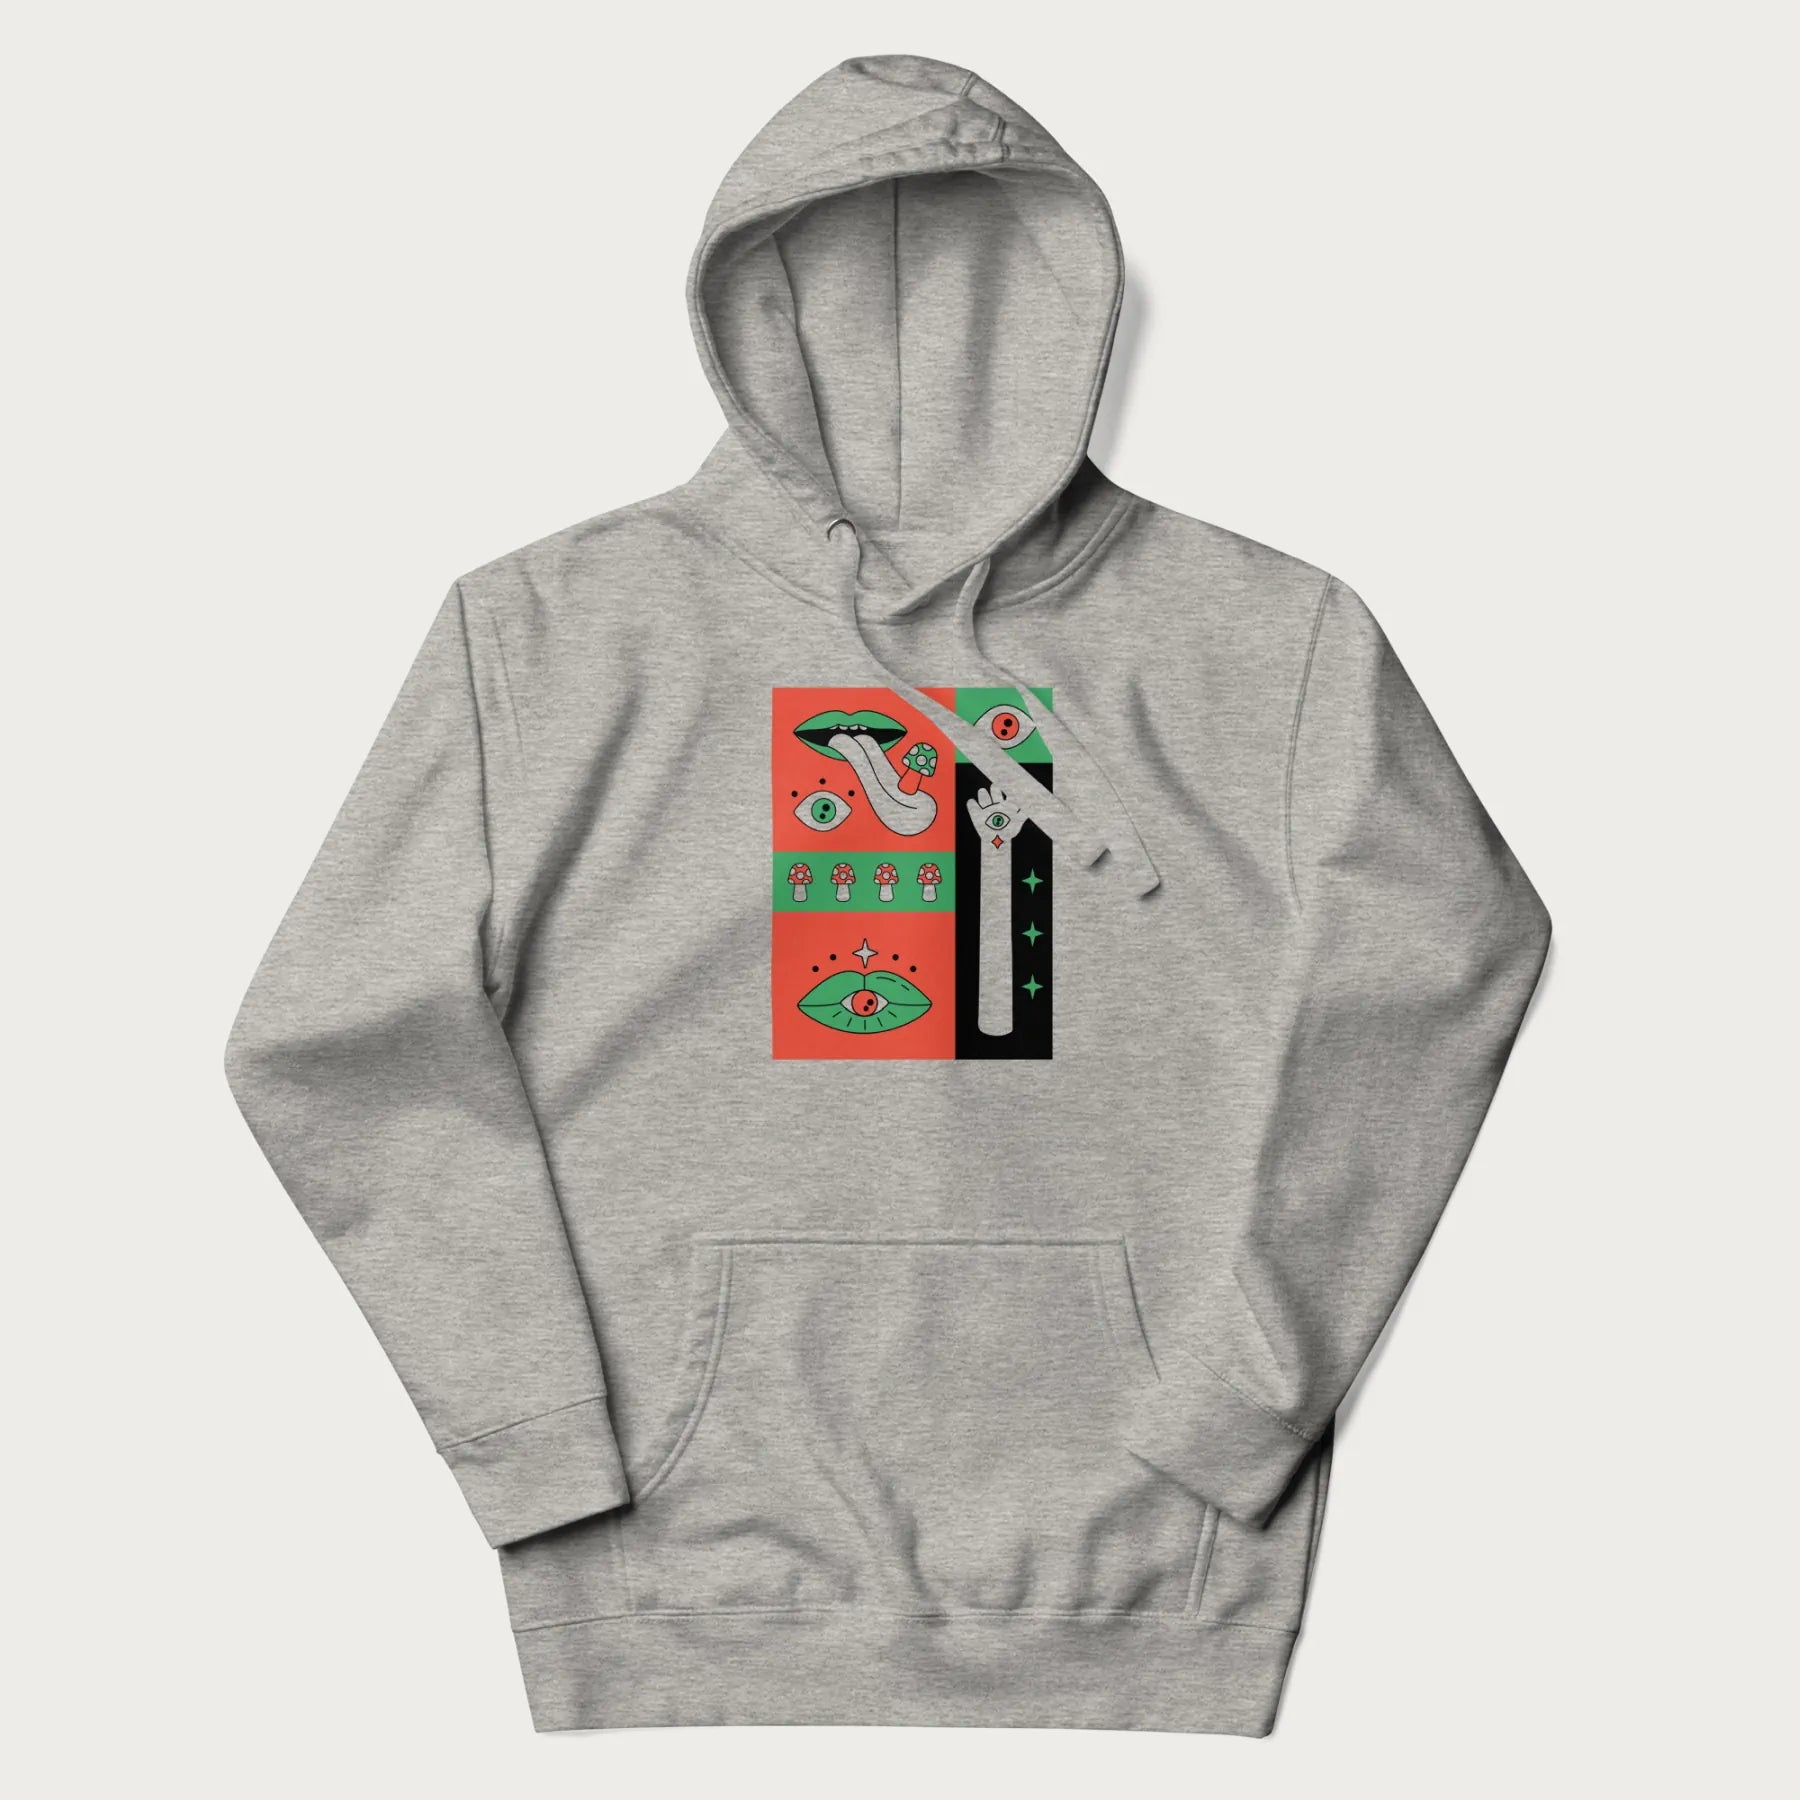 Light grey hoodie with mushroom psychedelic designs of surreal elements like lips, eyes, and mushrooms.